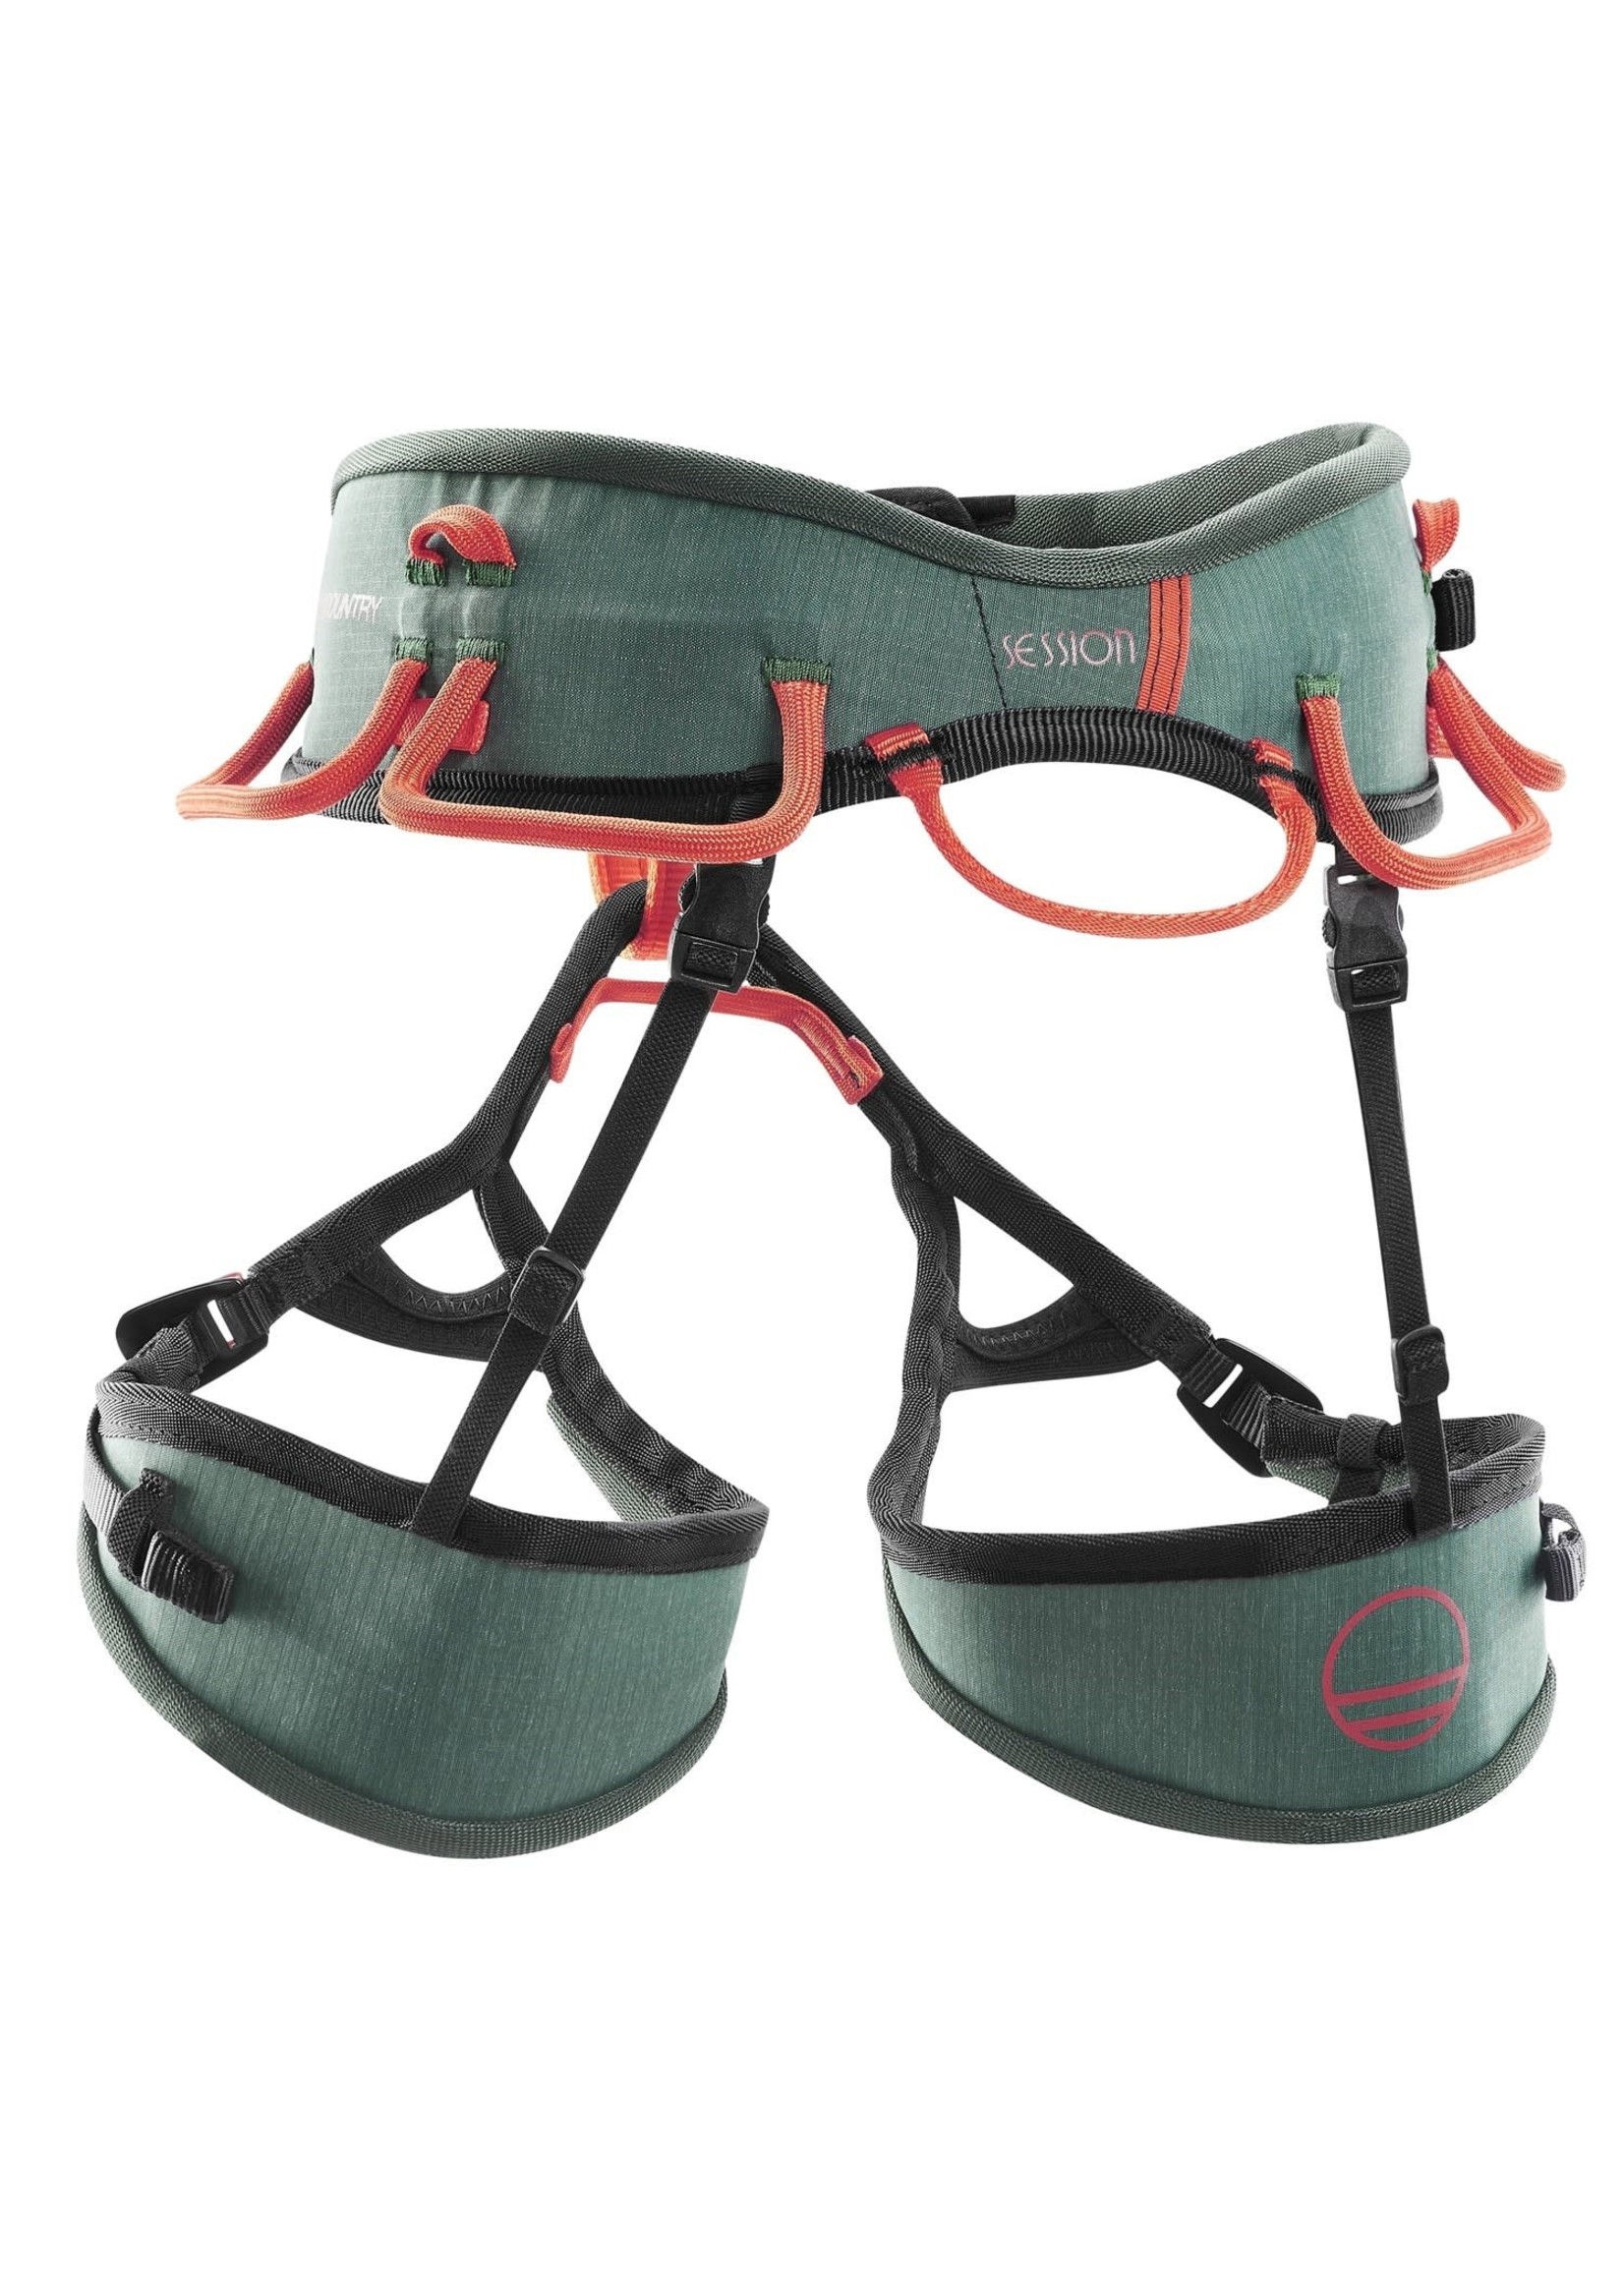 Wild Country Session Harness - Men